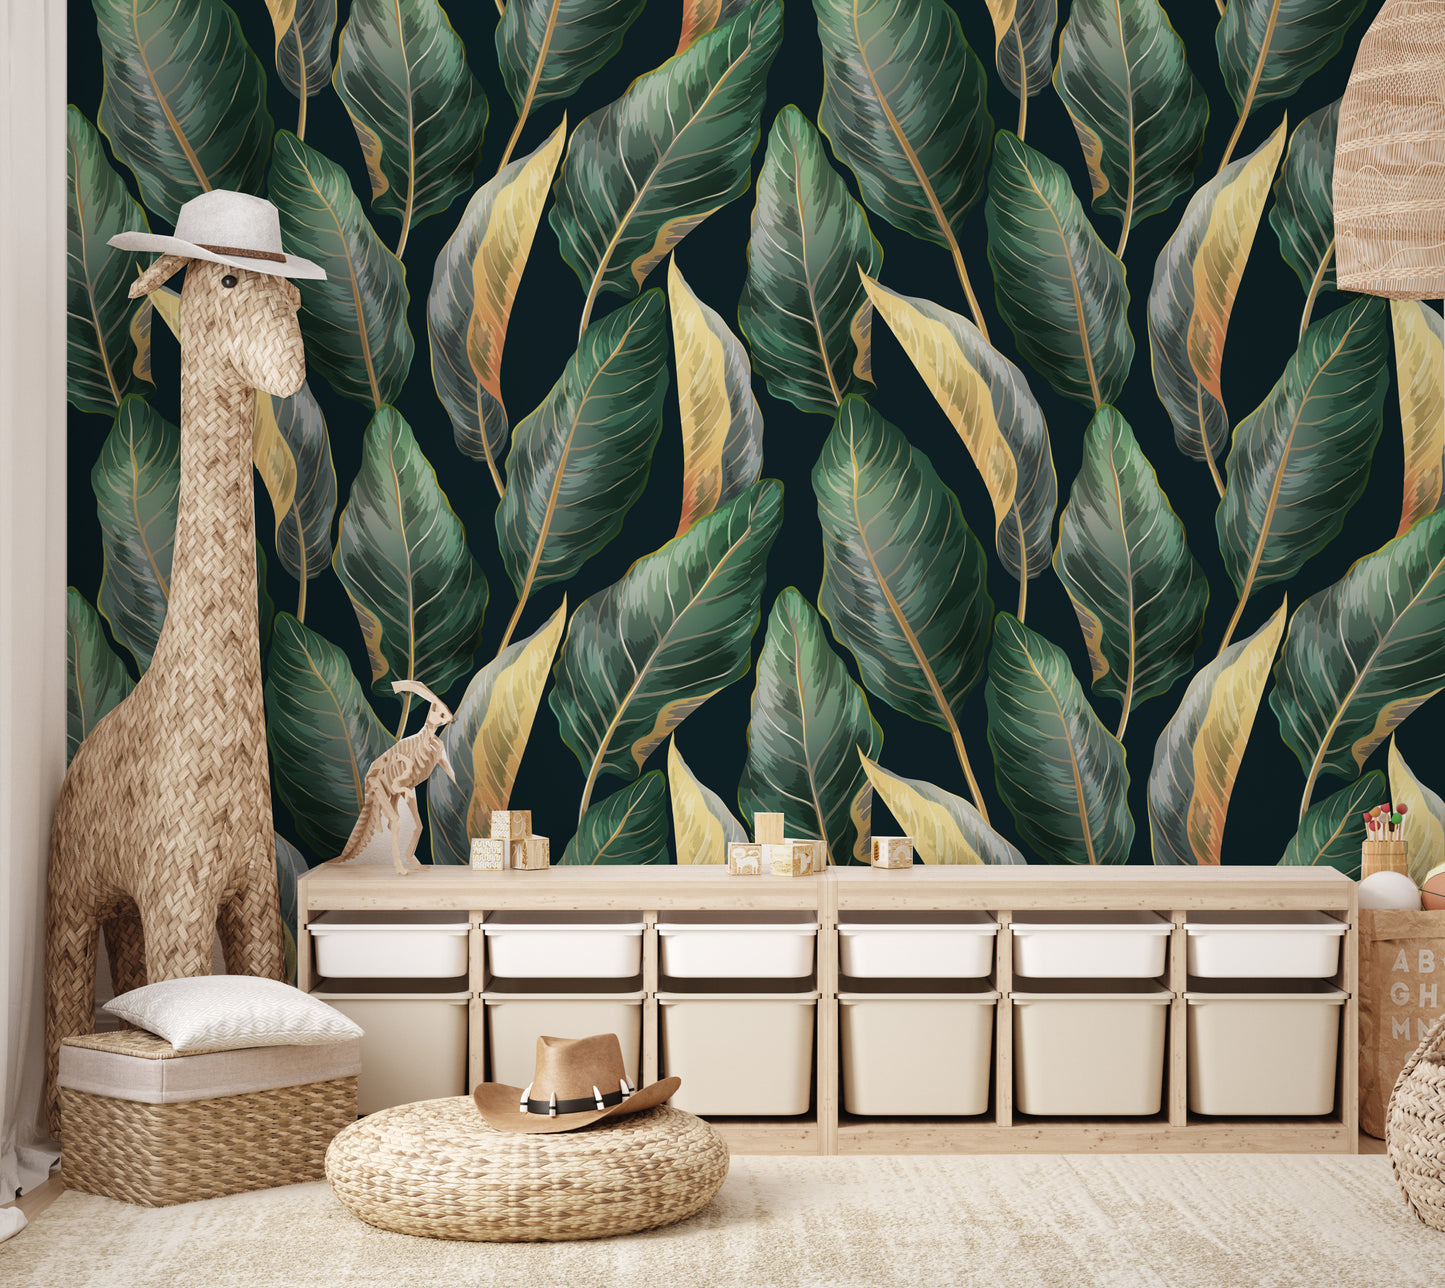 Dark tropical removable  peel and stick wallpaper in a playroom